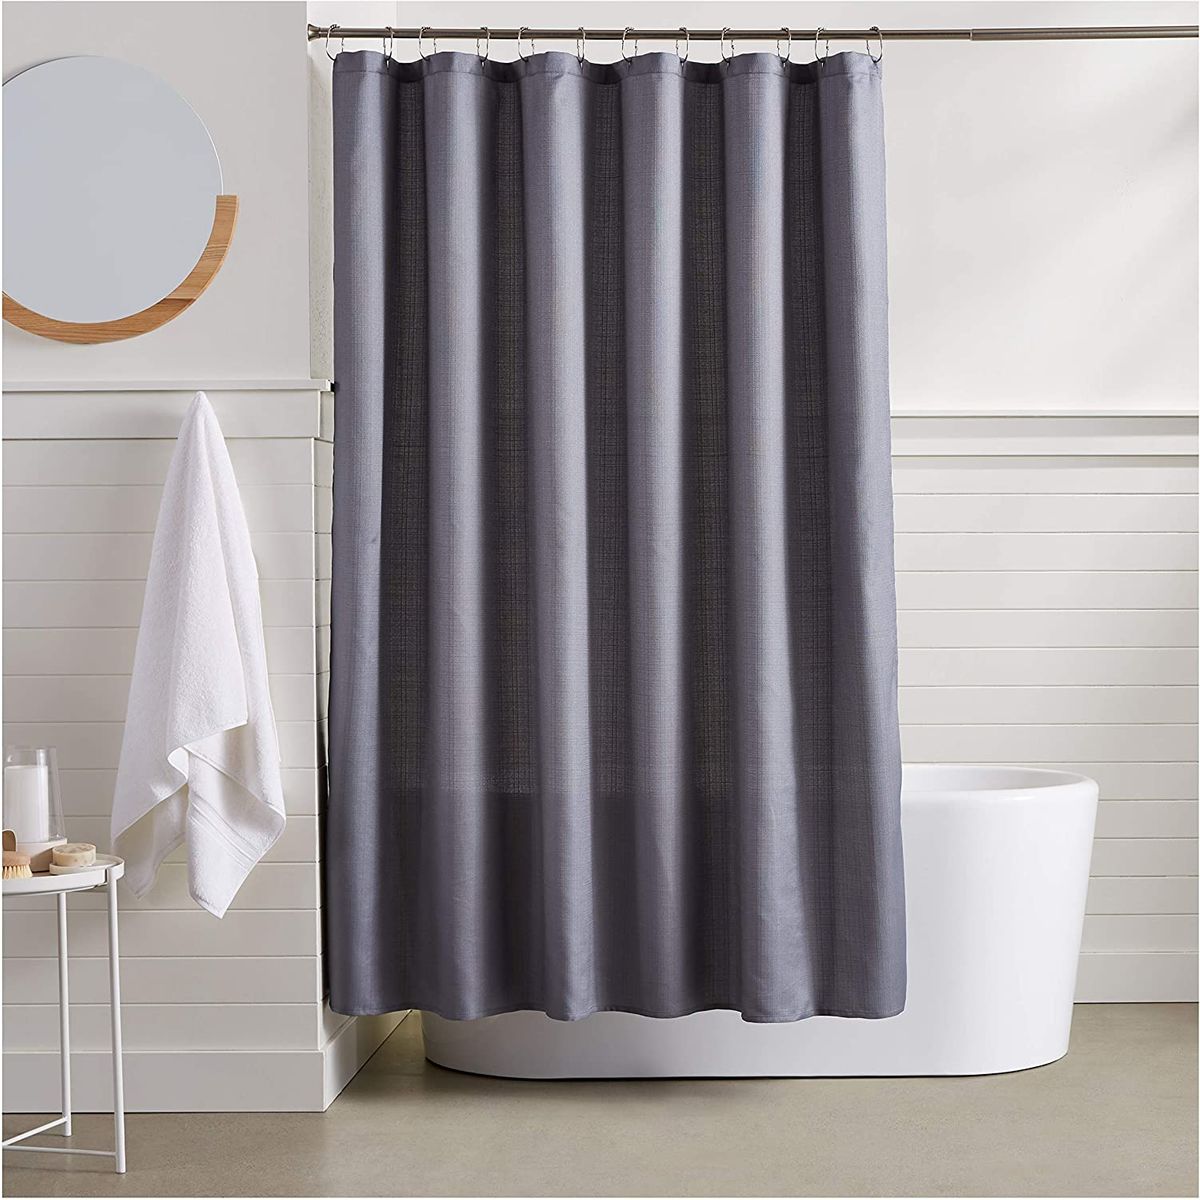 The Advantages of Polyester Shower Curtains